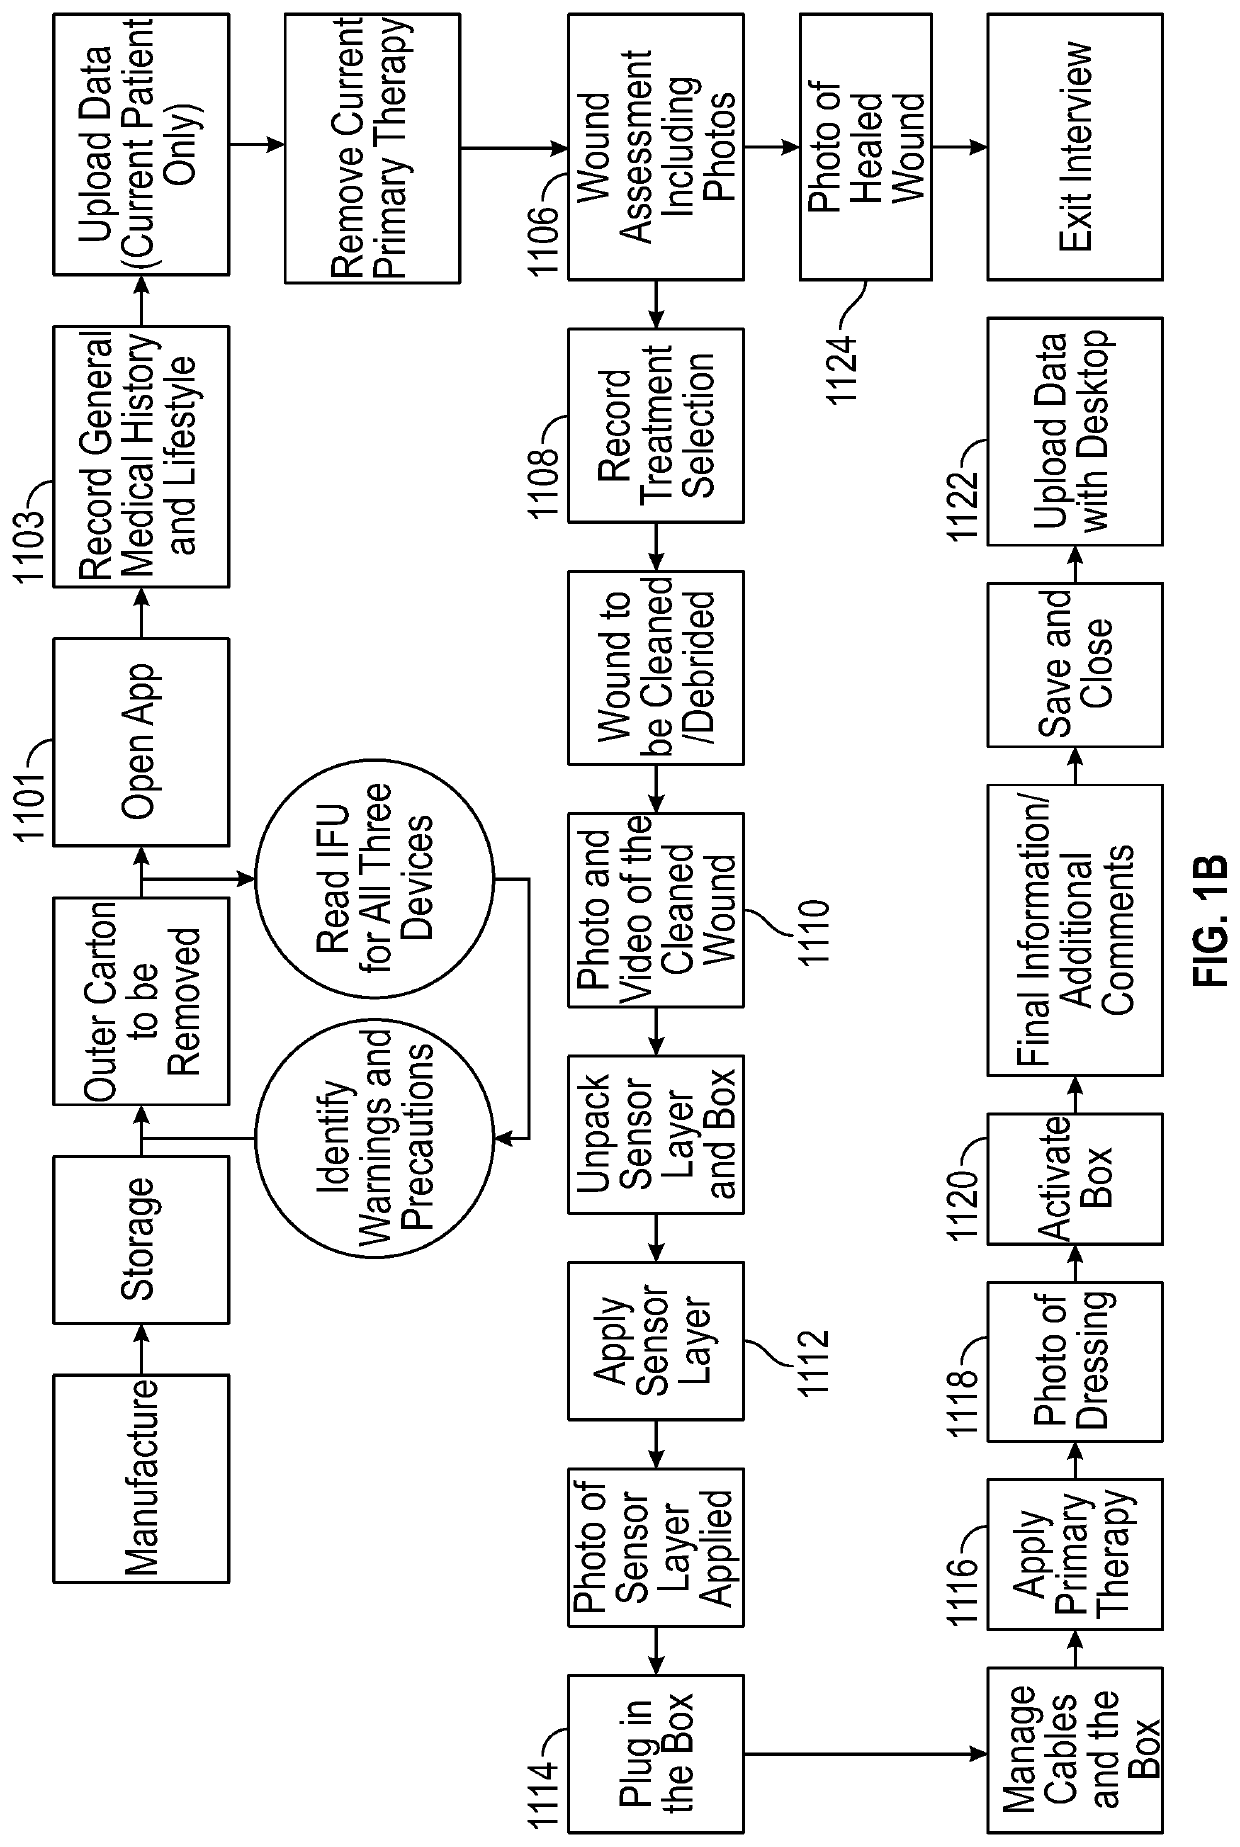 Integrated sensor enabled wound monitoring and/or therapy dressings and systems